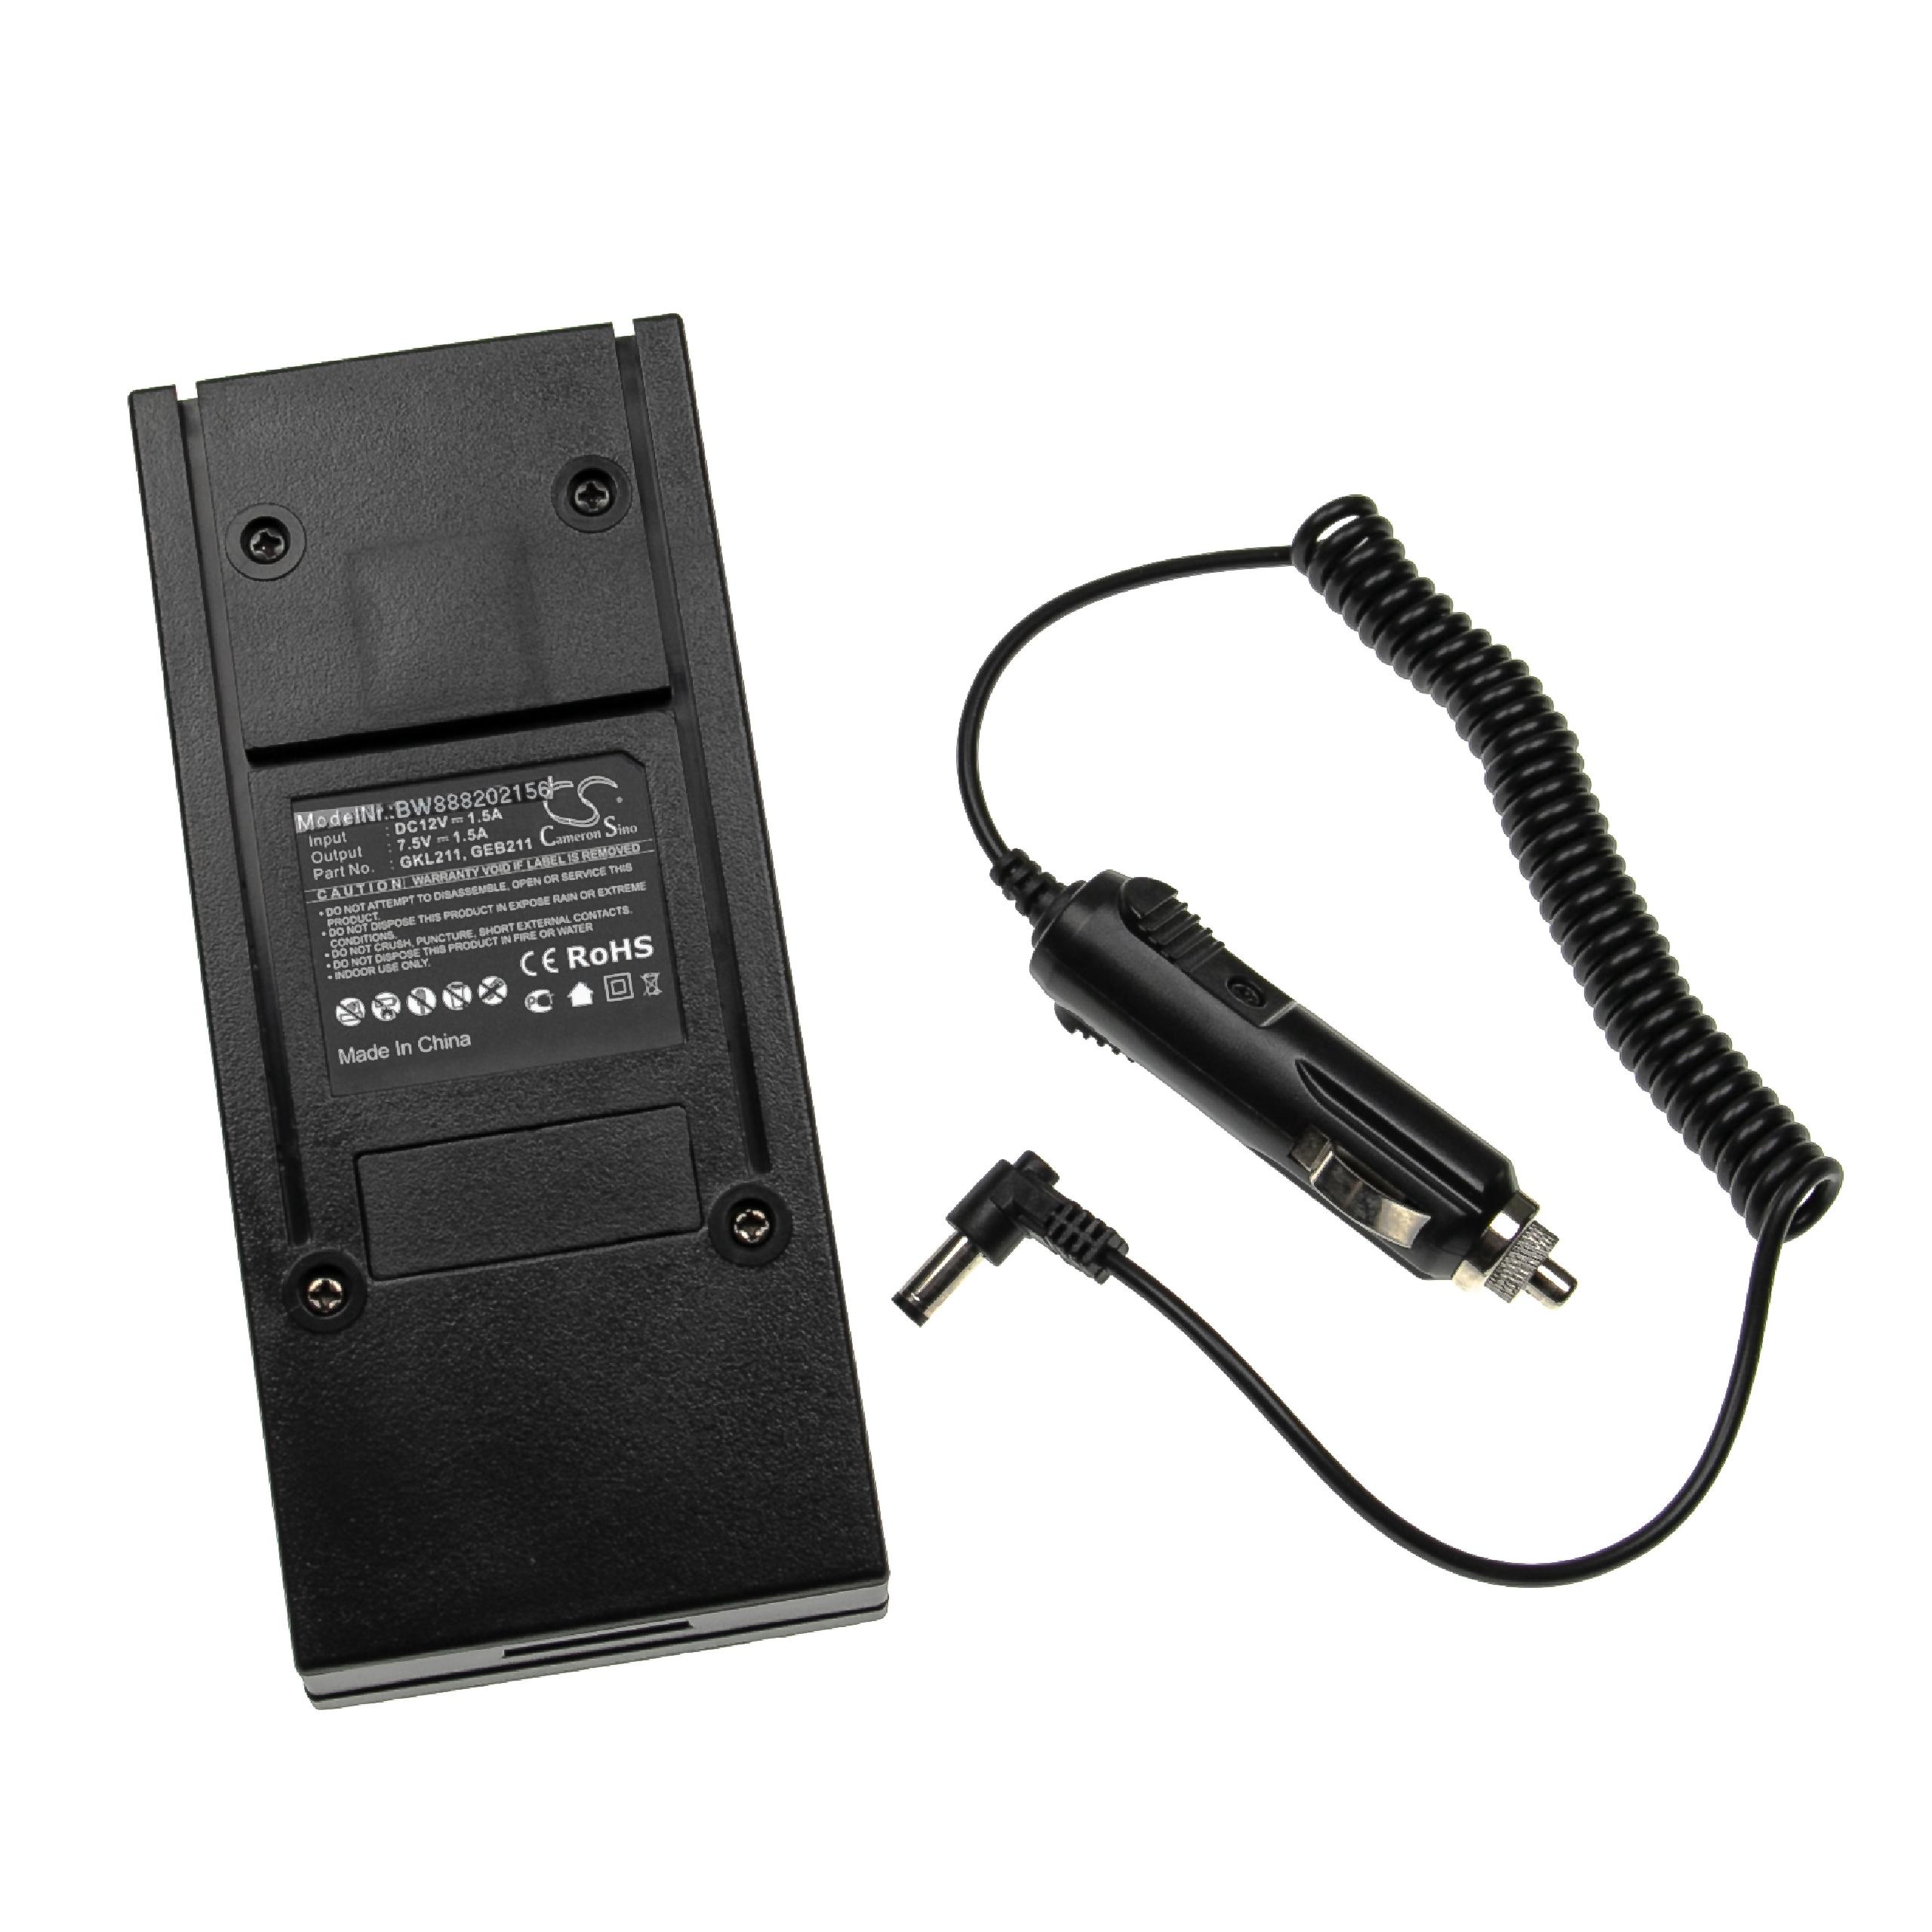 Charger Suitable for Measuring Tool / Battery etc. - Charge Dock + In-Car Cable, 7.5 V / 1.5 A